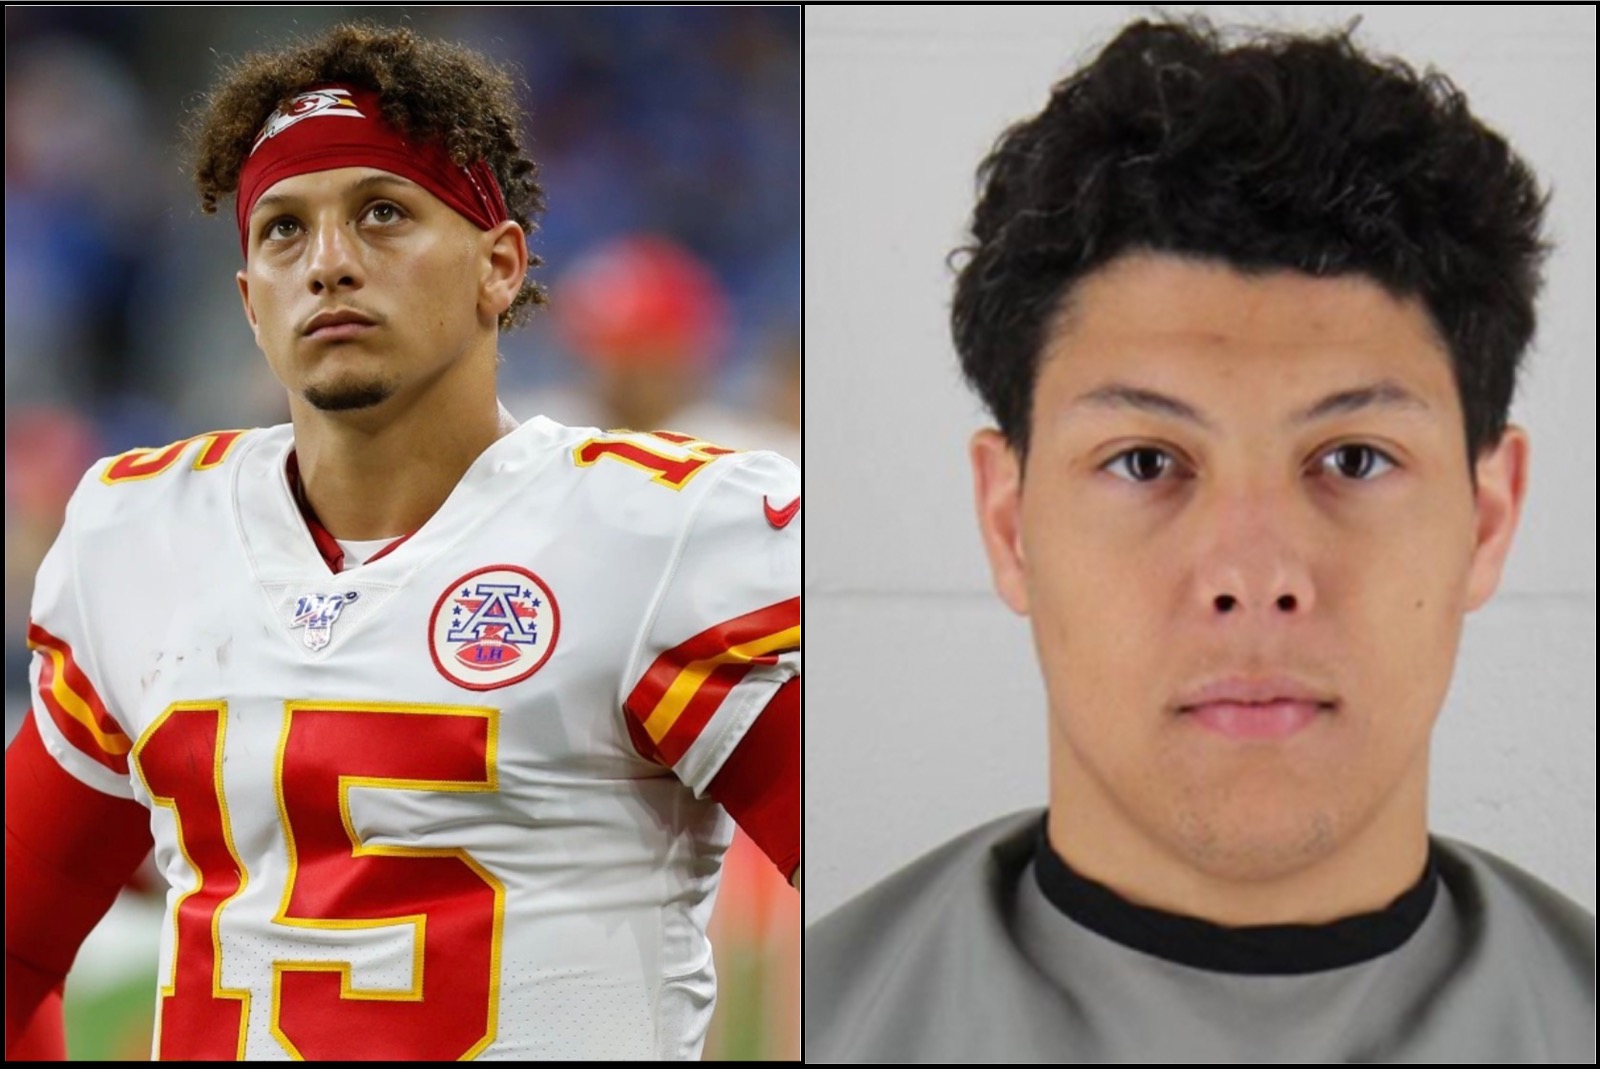 Patrick Mahomes Speaks on His Brother Jackson Mahomes Being Arrested For Forcibly Kissing Woman